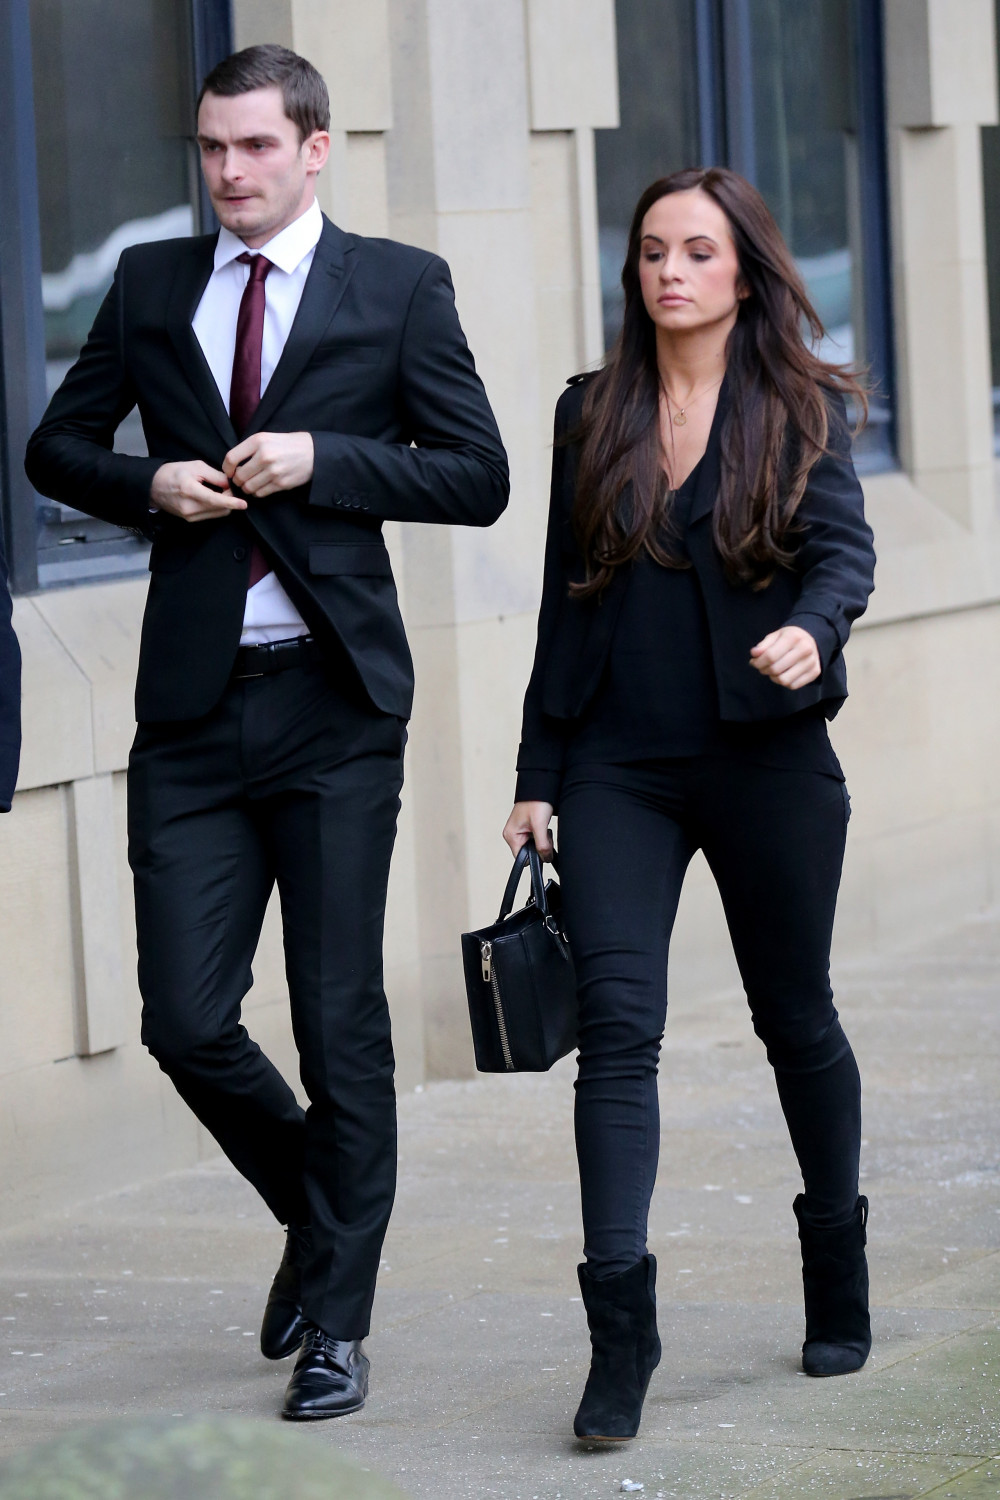 English Footballer Adam Johnson On Trial For Sexual Acts With Minor When His Girlfriend Just